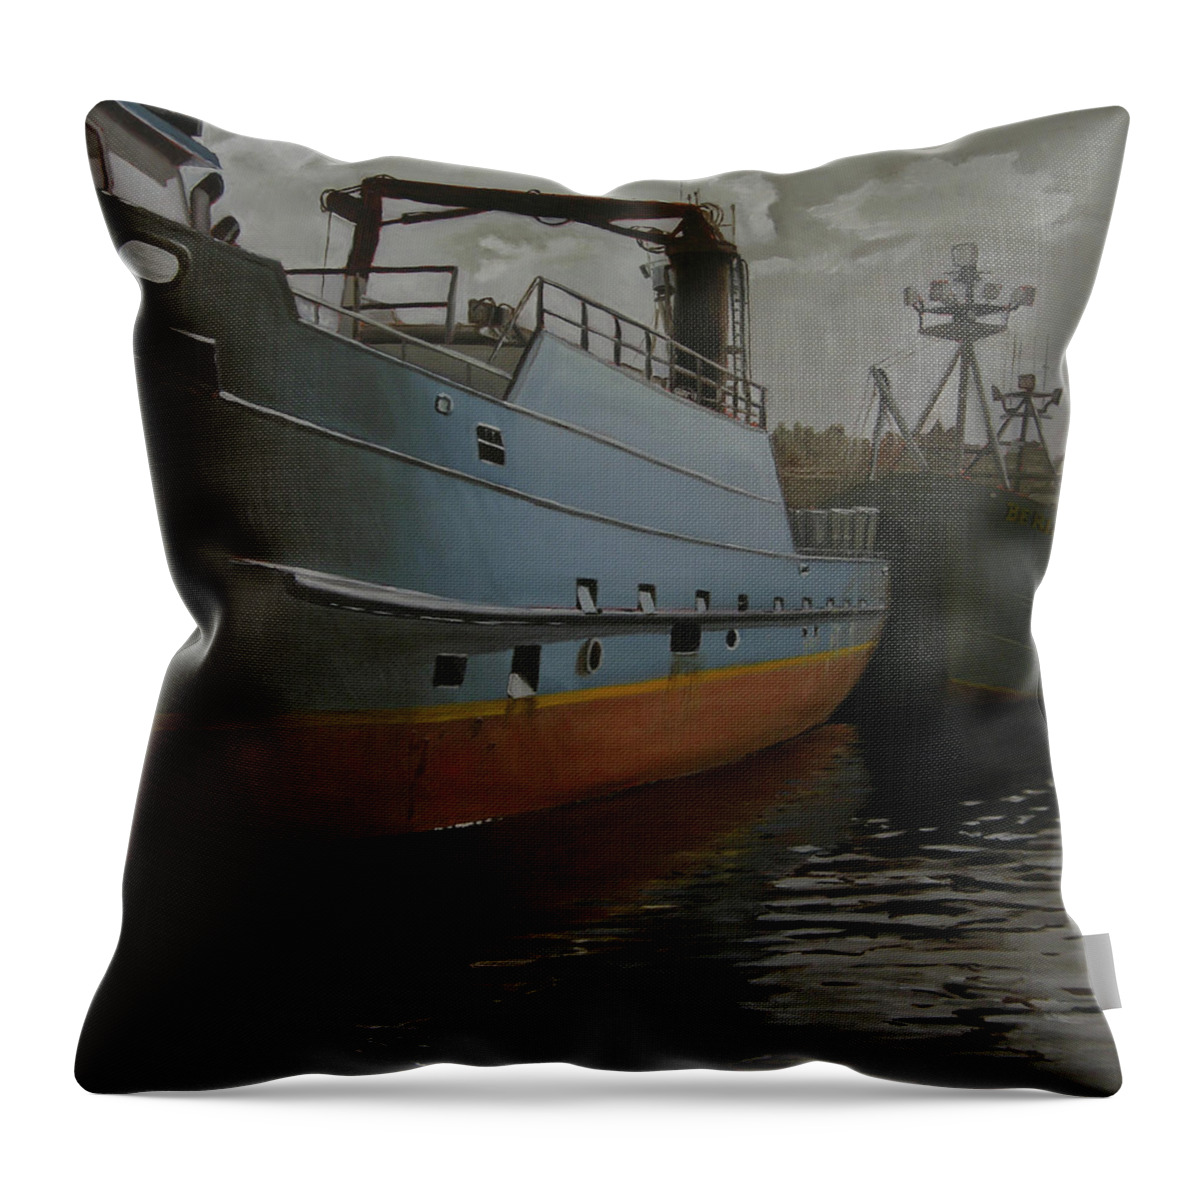 Ships Throw Pillow featuring the painting Bering Sea by Thu Nguyen